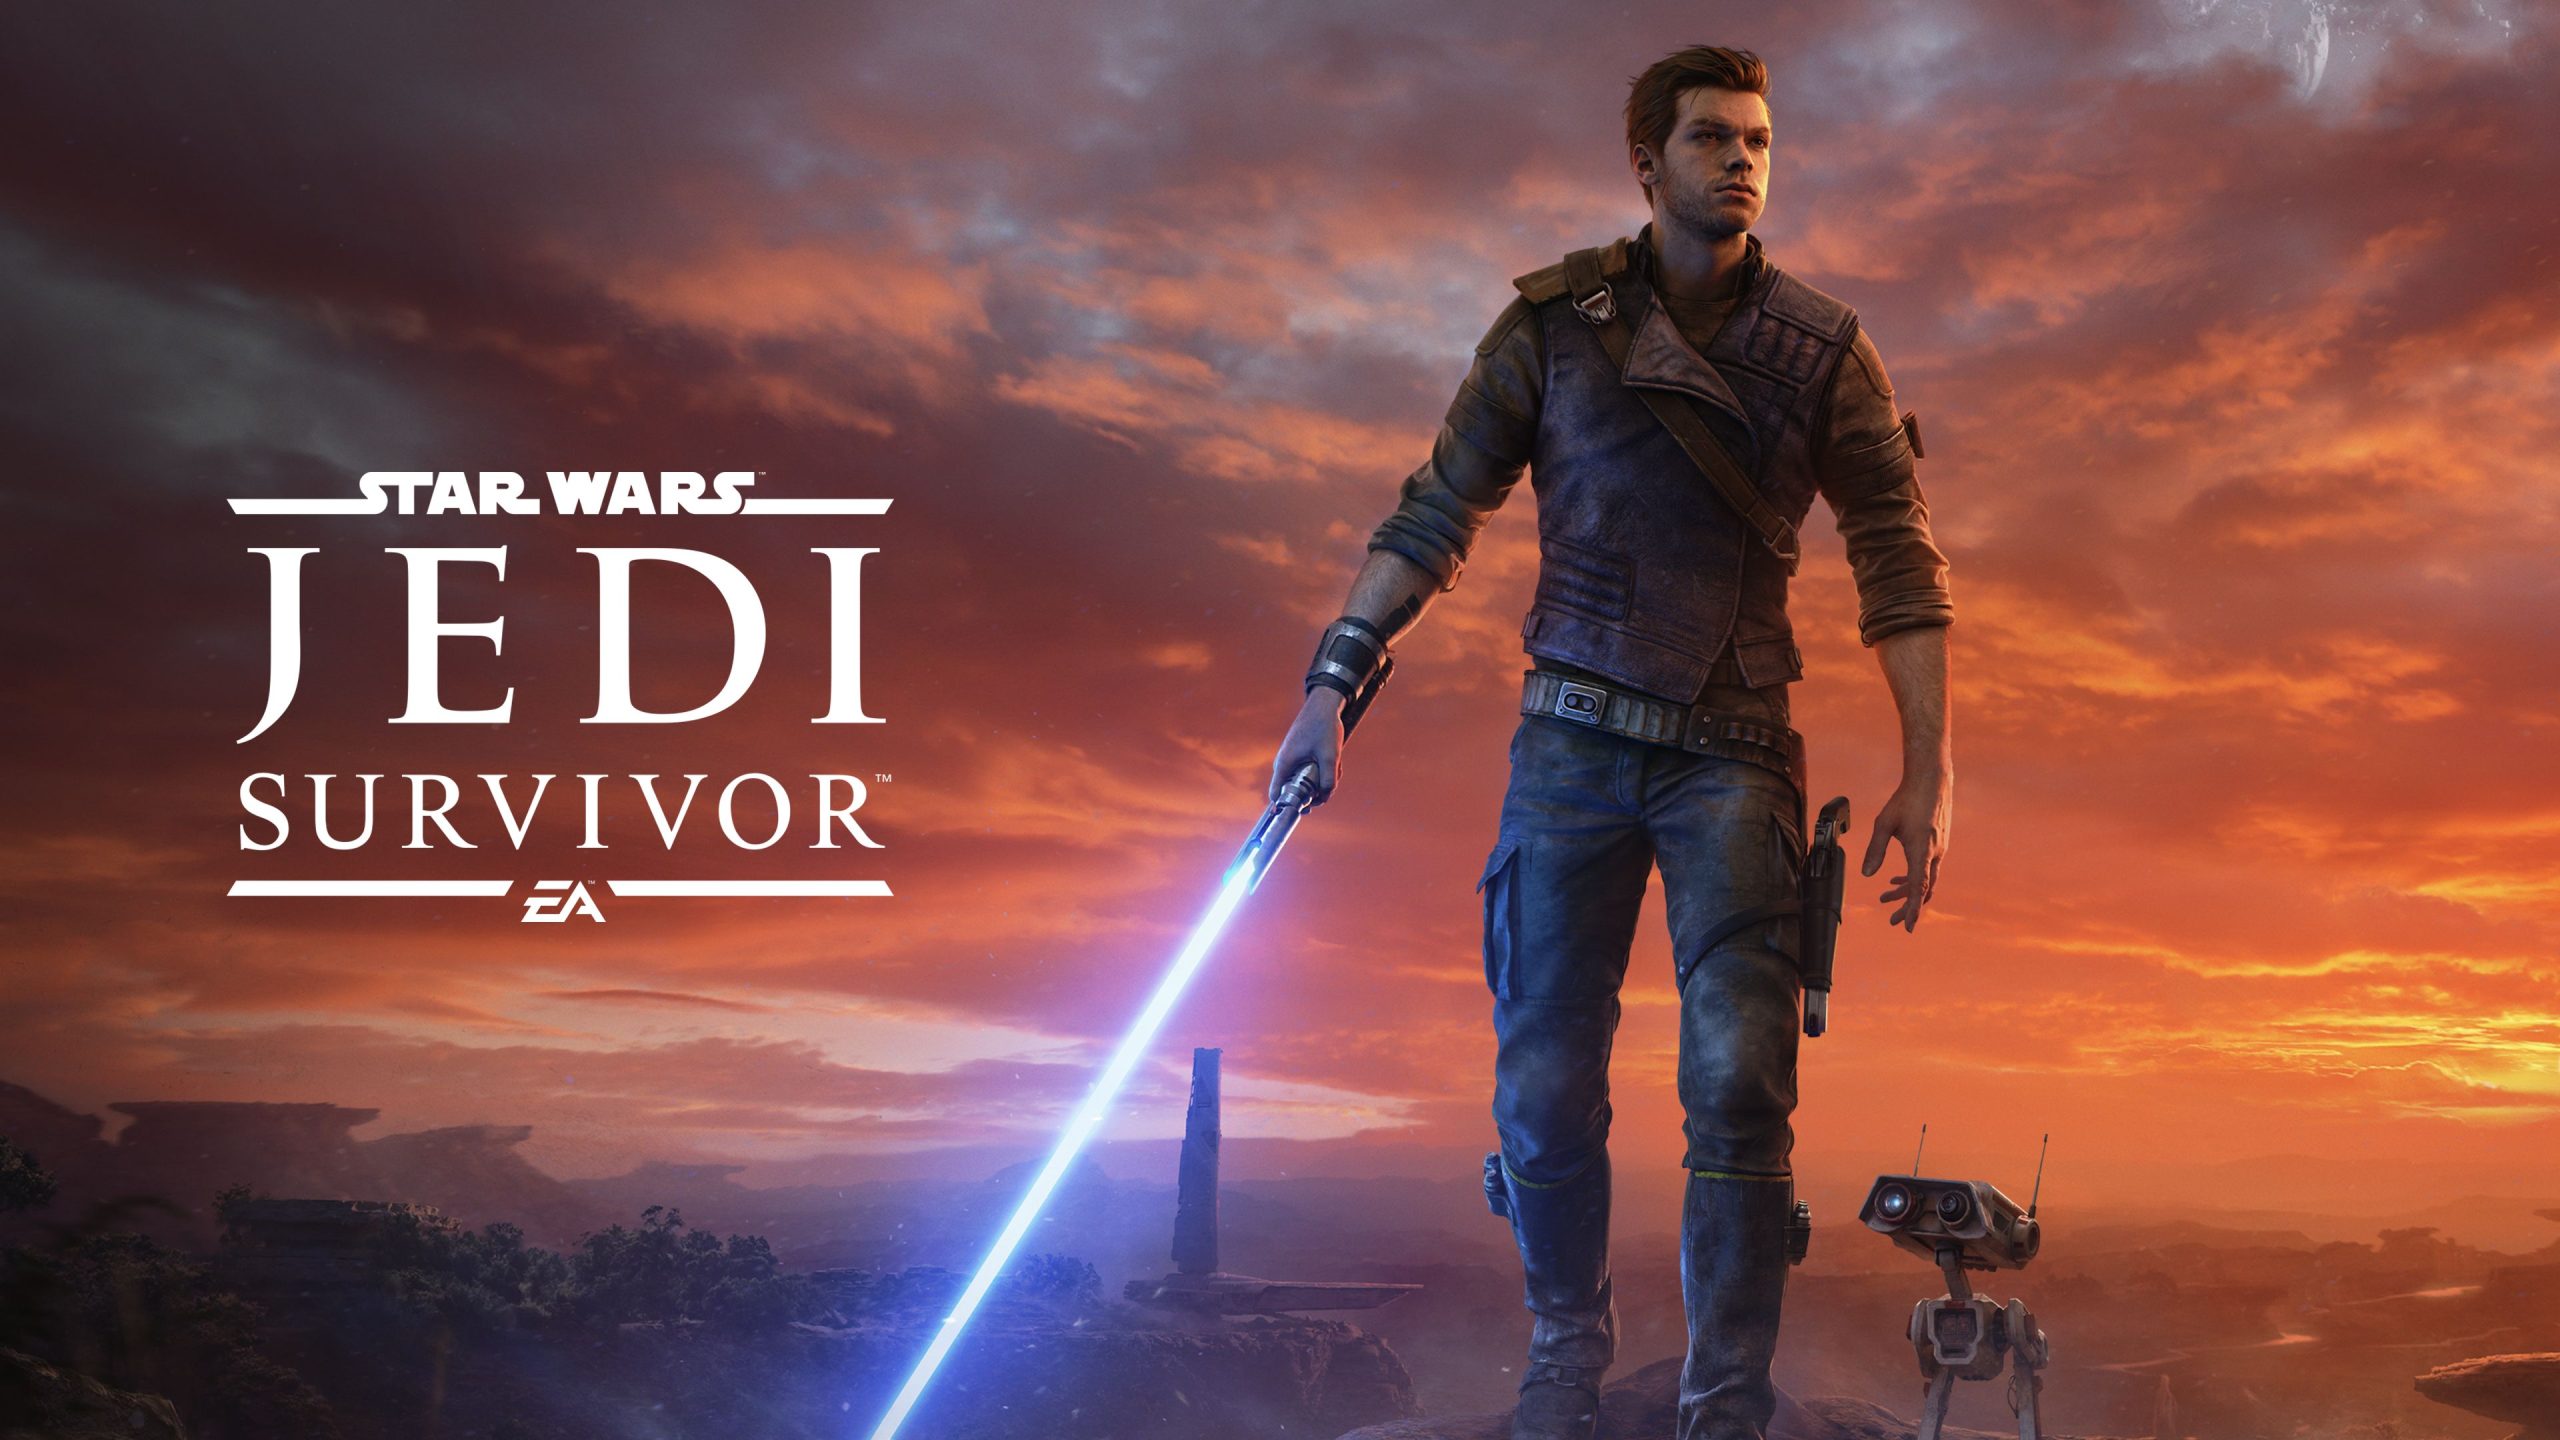 Image of apocalyptic looking background with an orange sunset. In the foreground is a male video game character, holding a blue lightsaber. Beside him is a small robot. The text says Star Wars Jedi Survivor, with the EA Game logo.